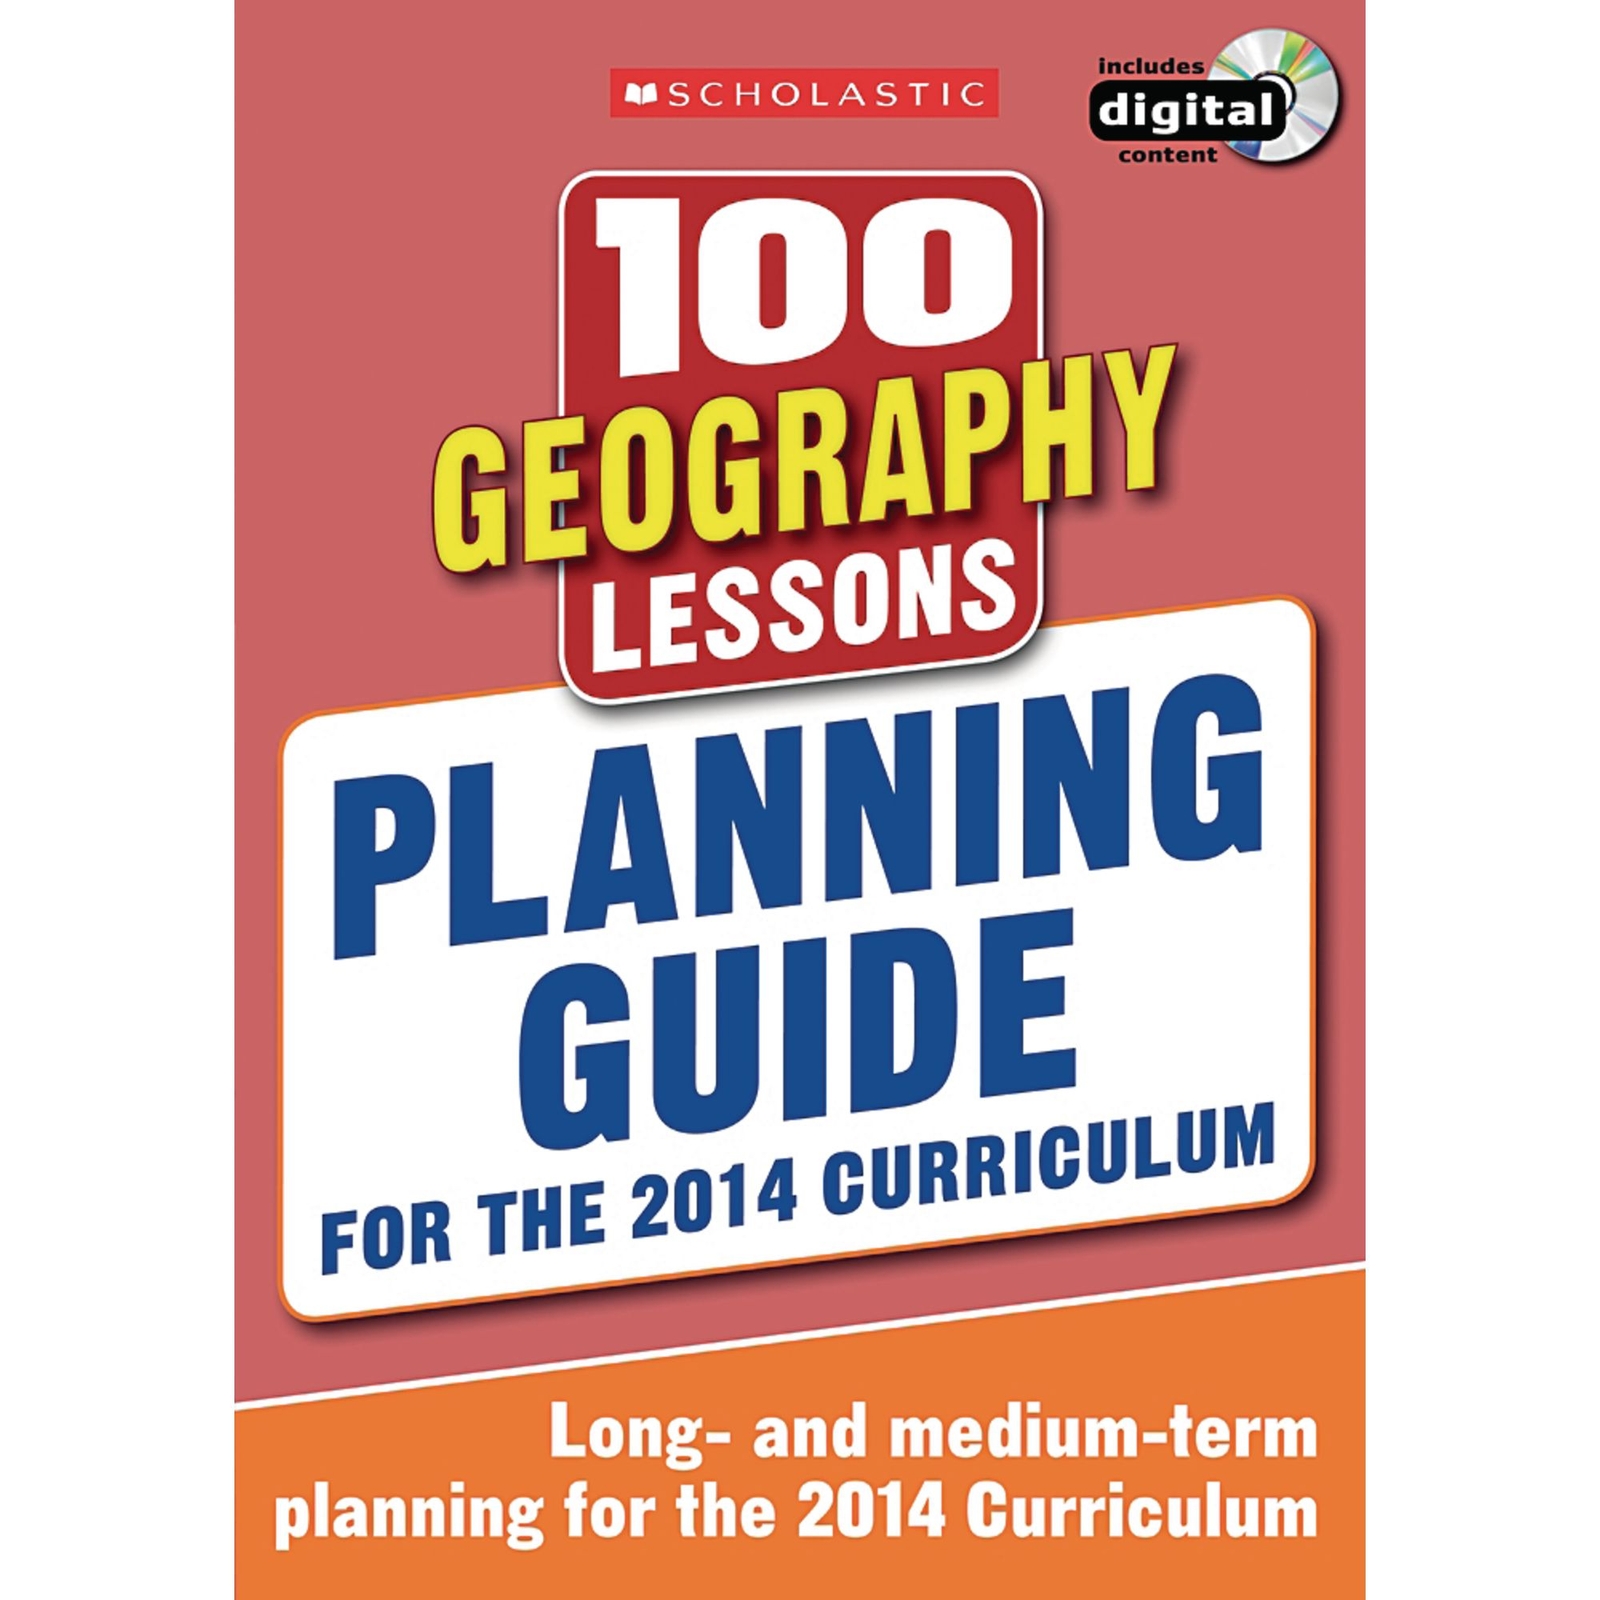 Scholastic 100 Geography Lessons 2014 Curriculum Planning Guide Book - Each